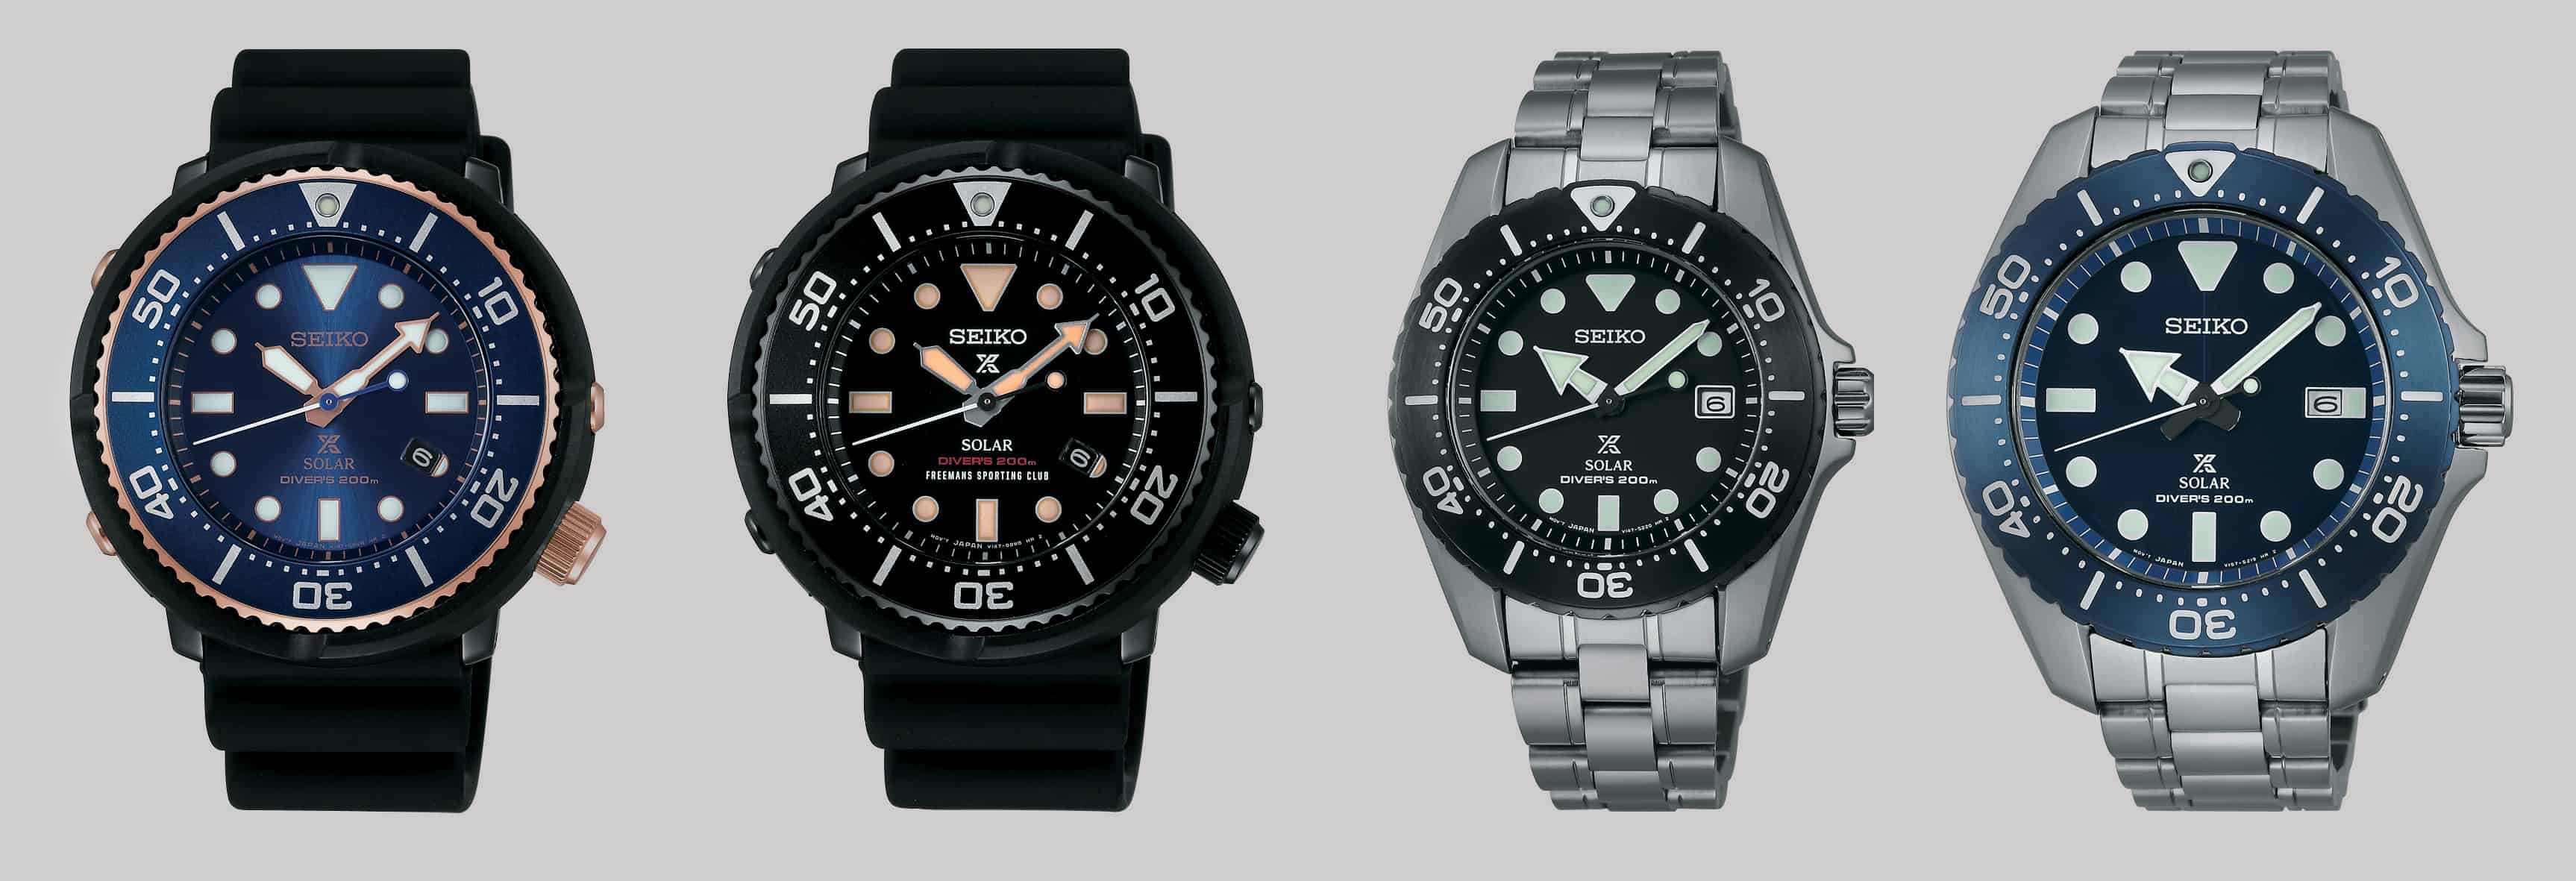 Seiko Introduces New JDM Solar Divers For Under $500 - Worn & Wound